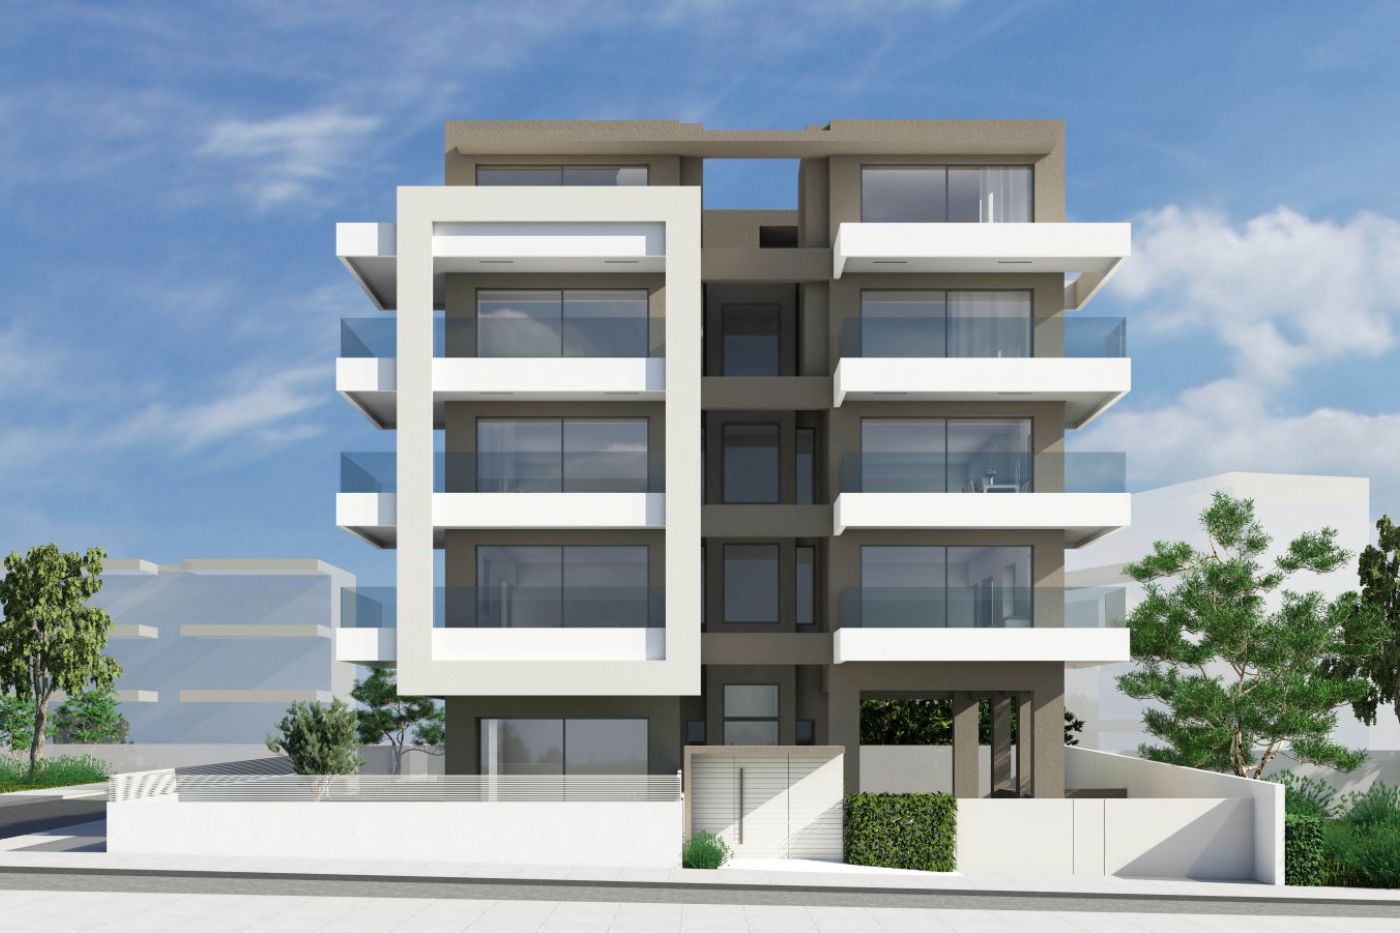 Voula residence, Voula appartments, Glyfada, Greece properties, Christakis and Associates